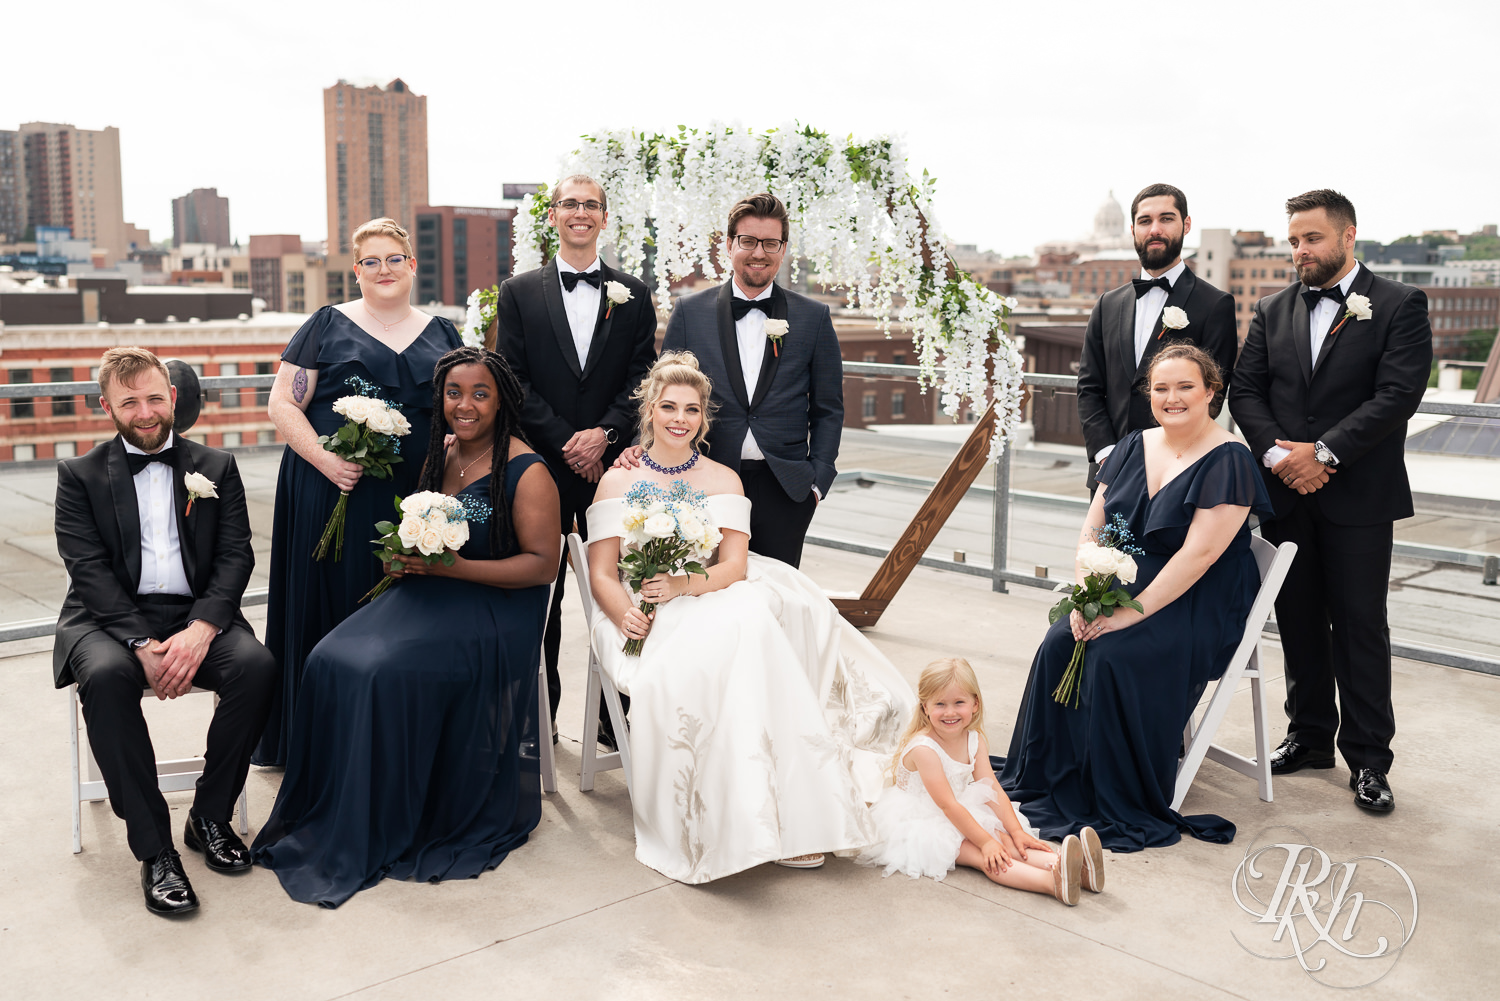 Wedding party on rooftop at Abulae in Saint Paul, Minnesota.